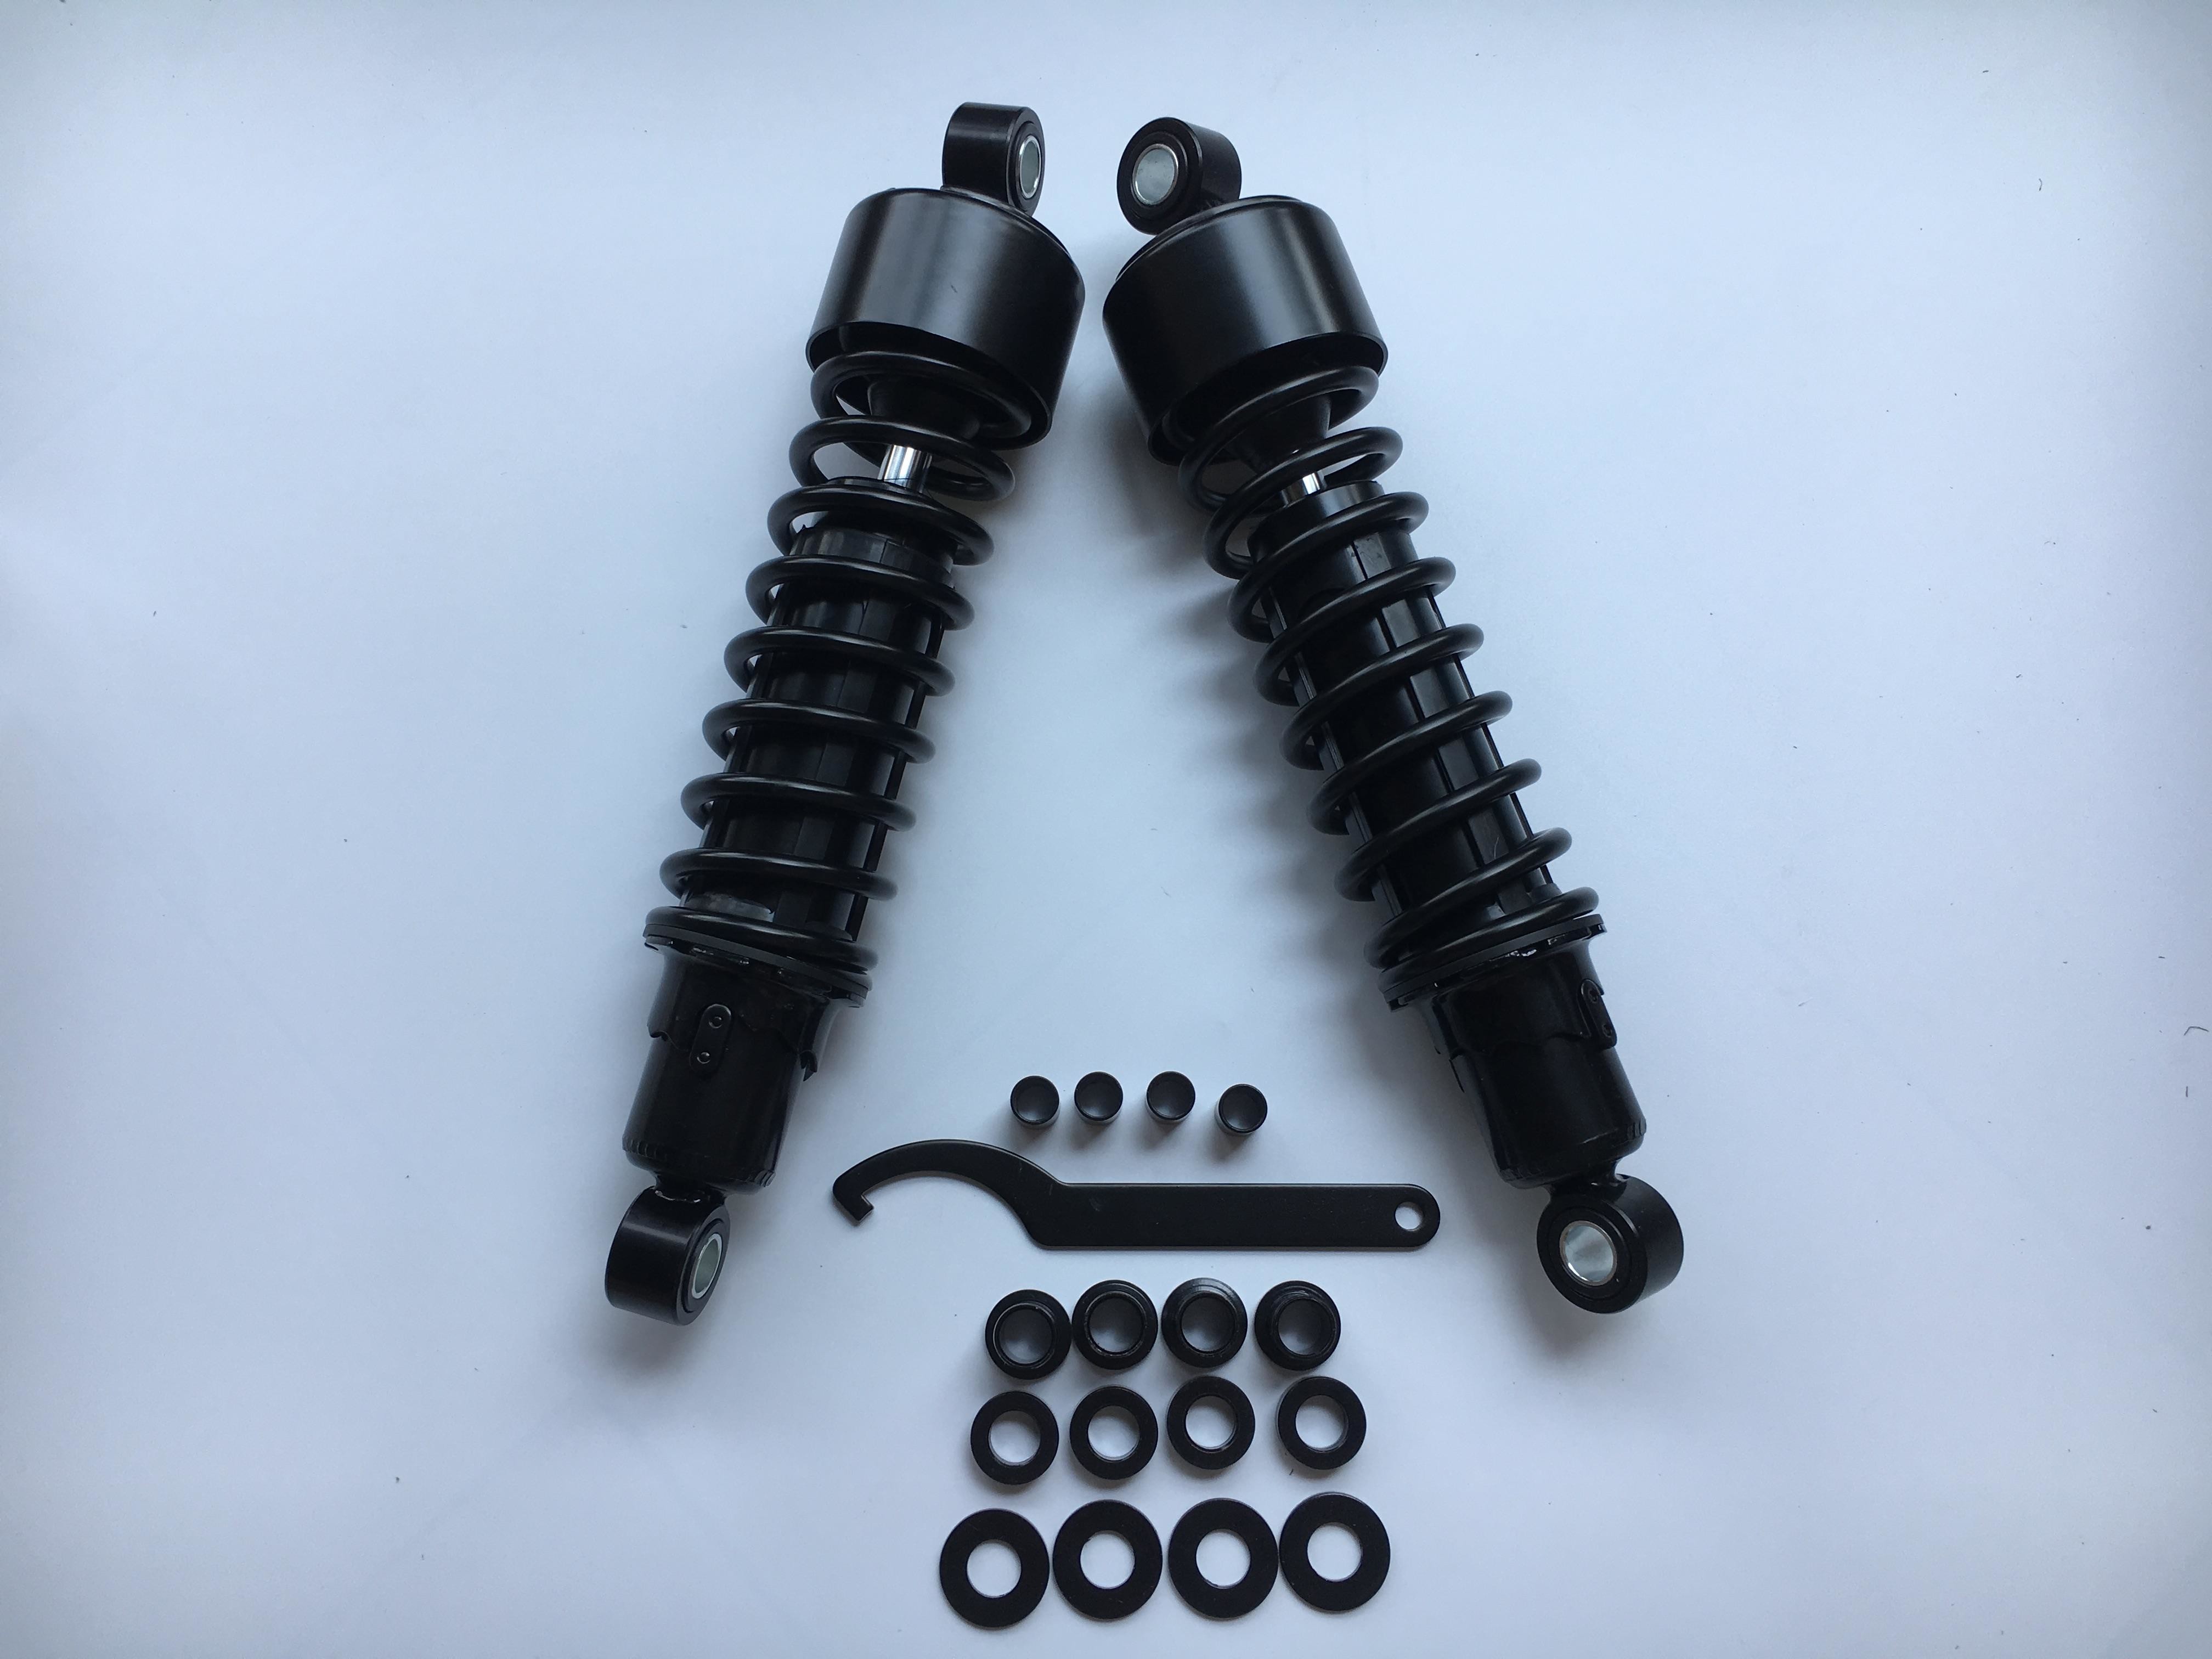 Wholesale 11.75 INCH SHOCK ABSORBER FIT FOR HARLEY DAVIDSON SPORTSTER 883 1200 from china suppliers